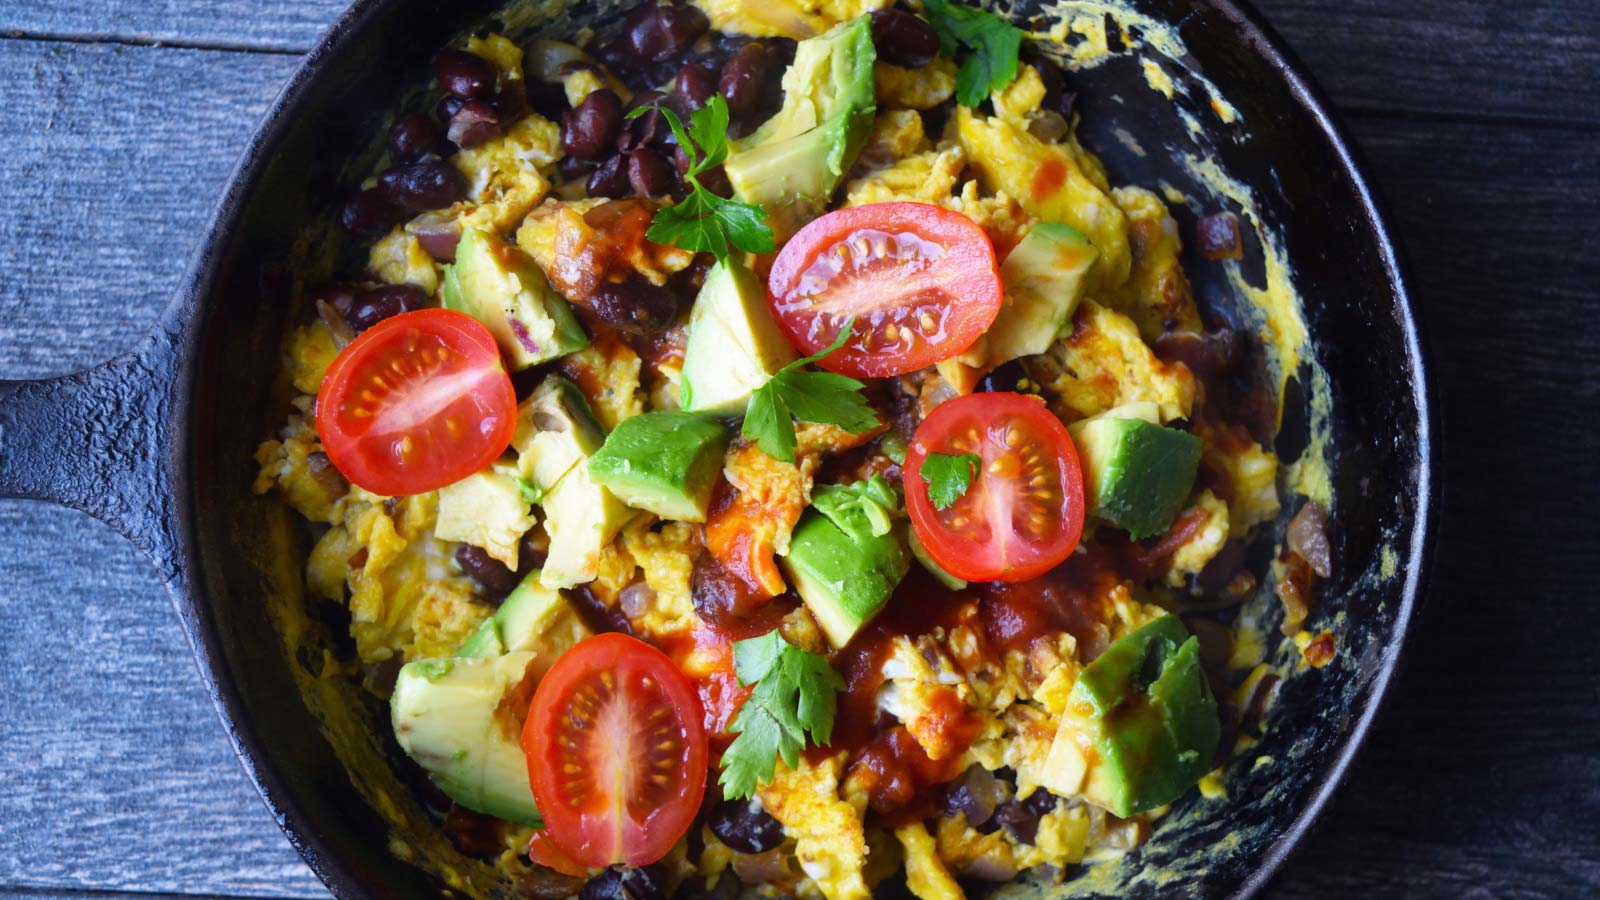 An overhead view of a black skillet filled with Mexican Scrambled Eggs.